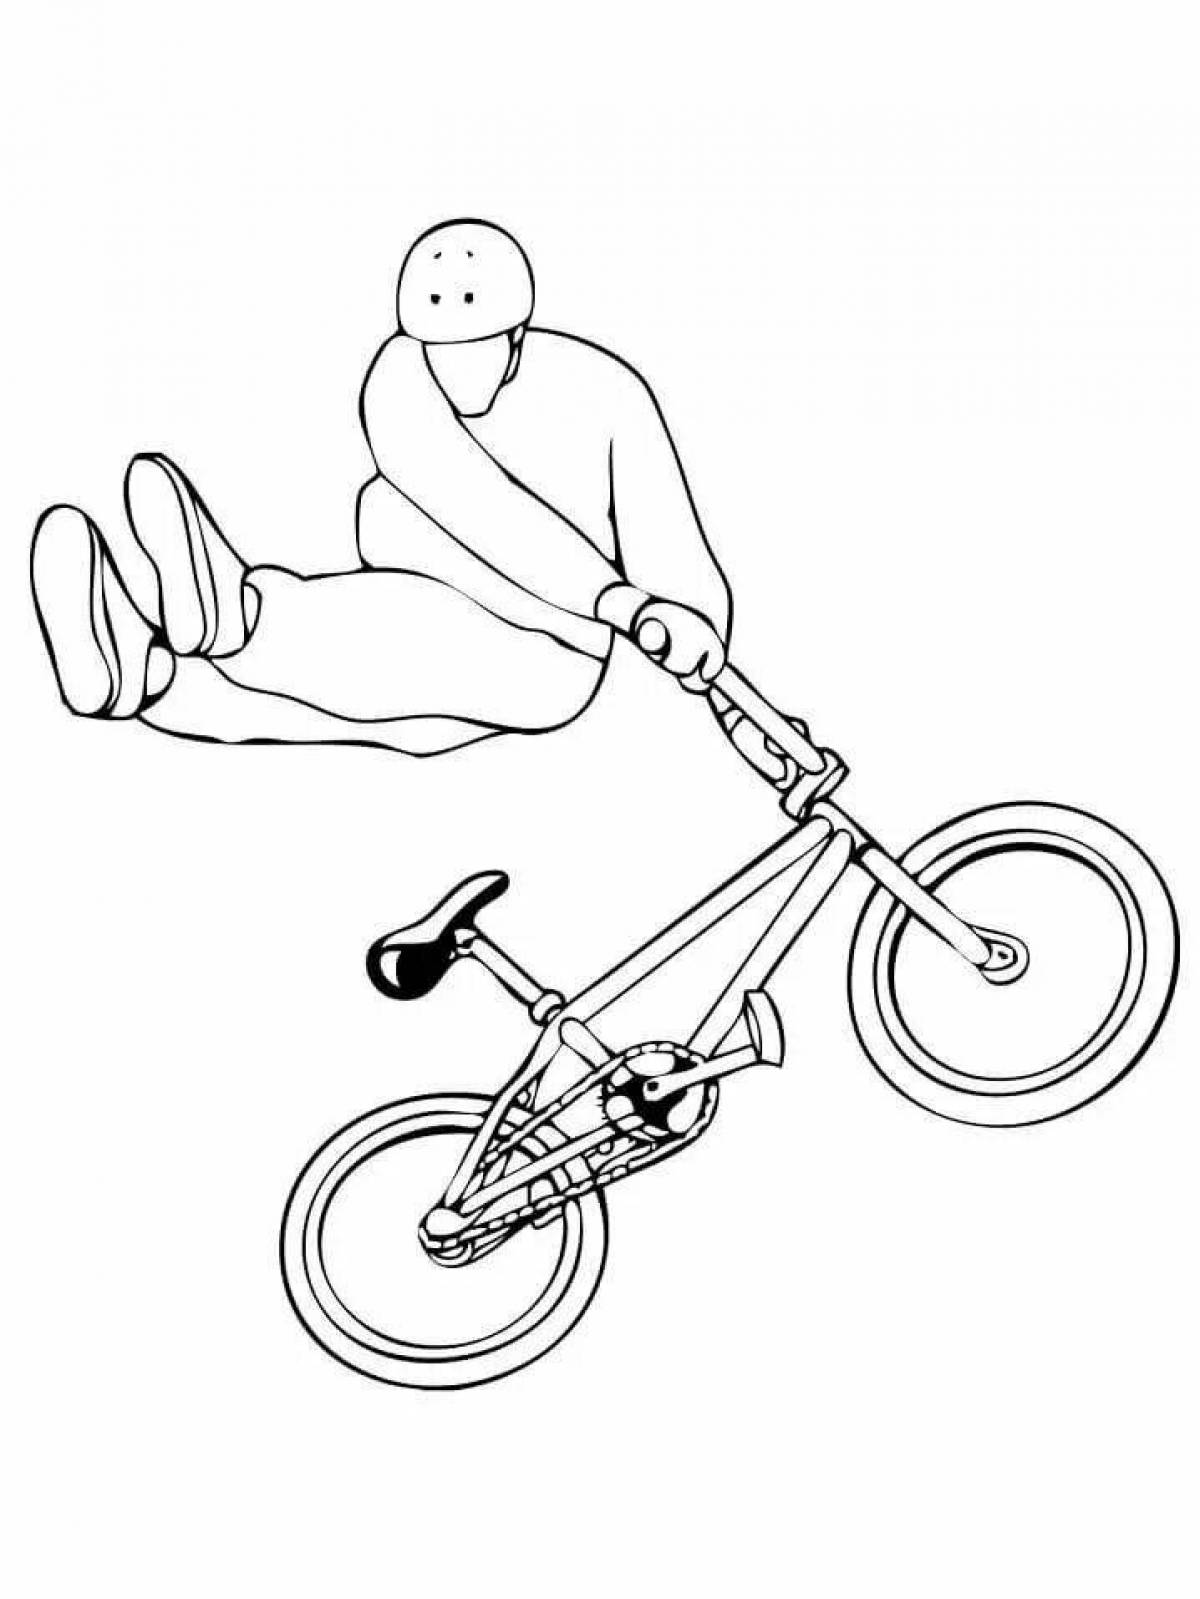 Radiant stunt scooter coloring page